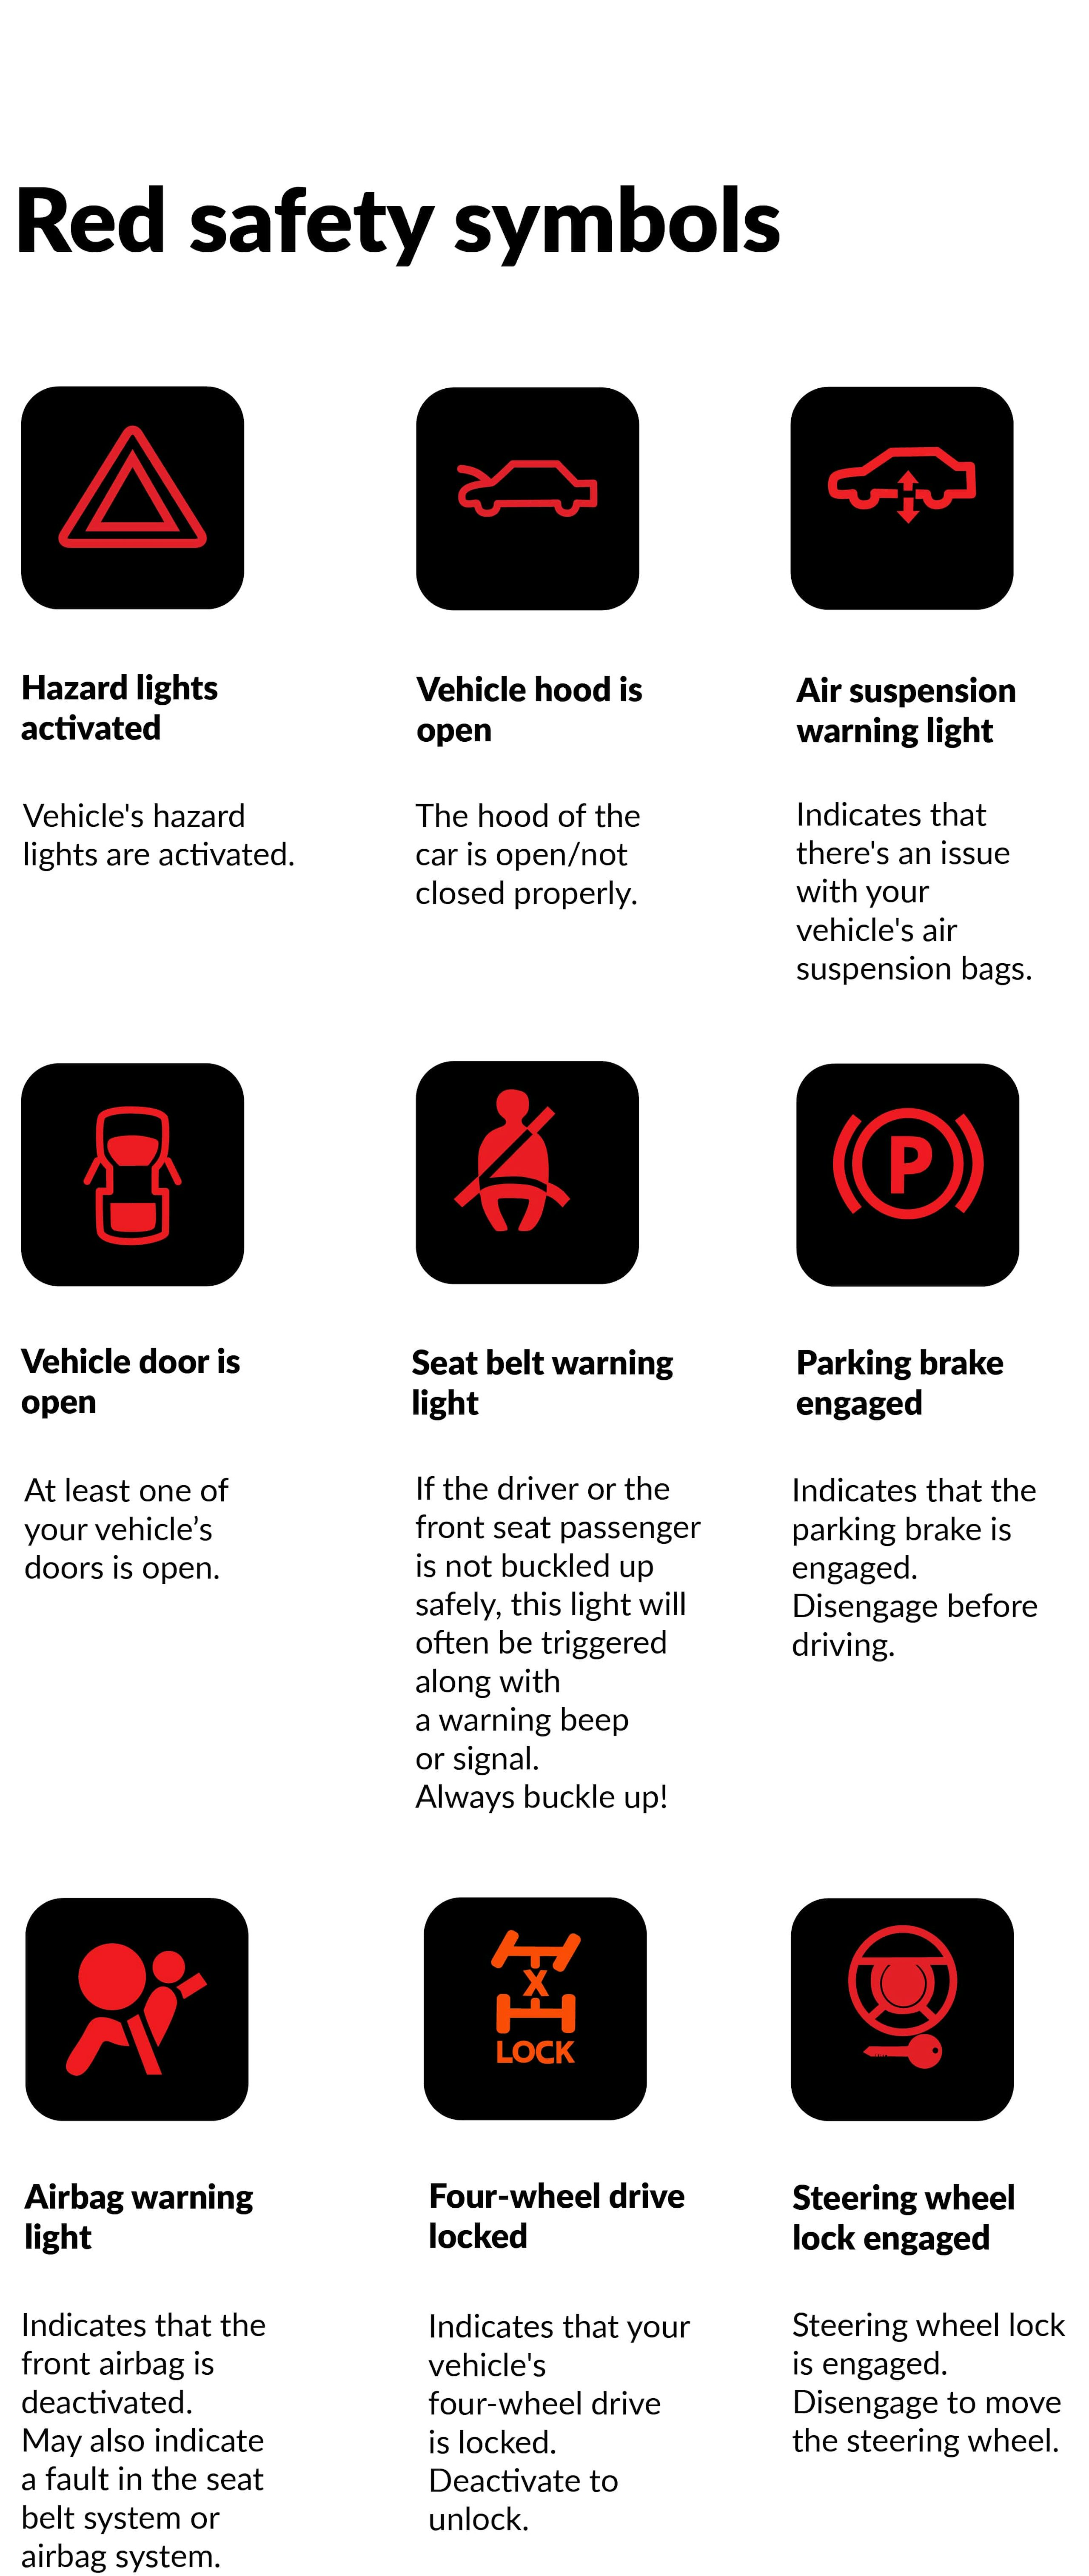 complete list of all red safety symbols on the car's dashboard 